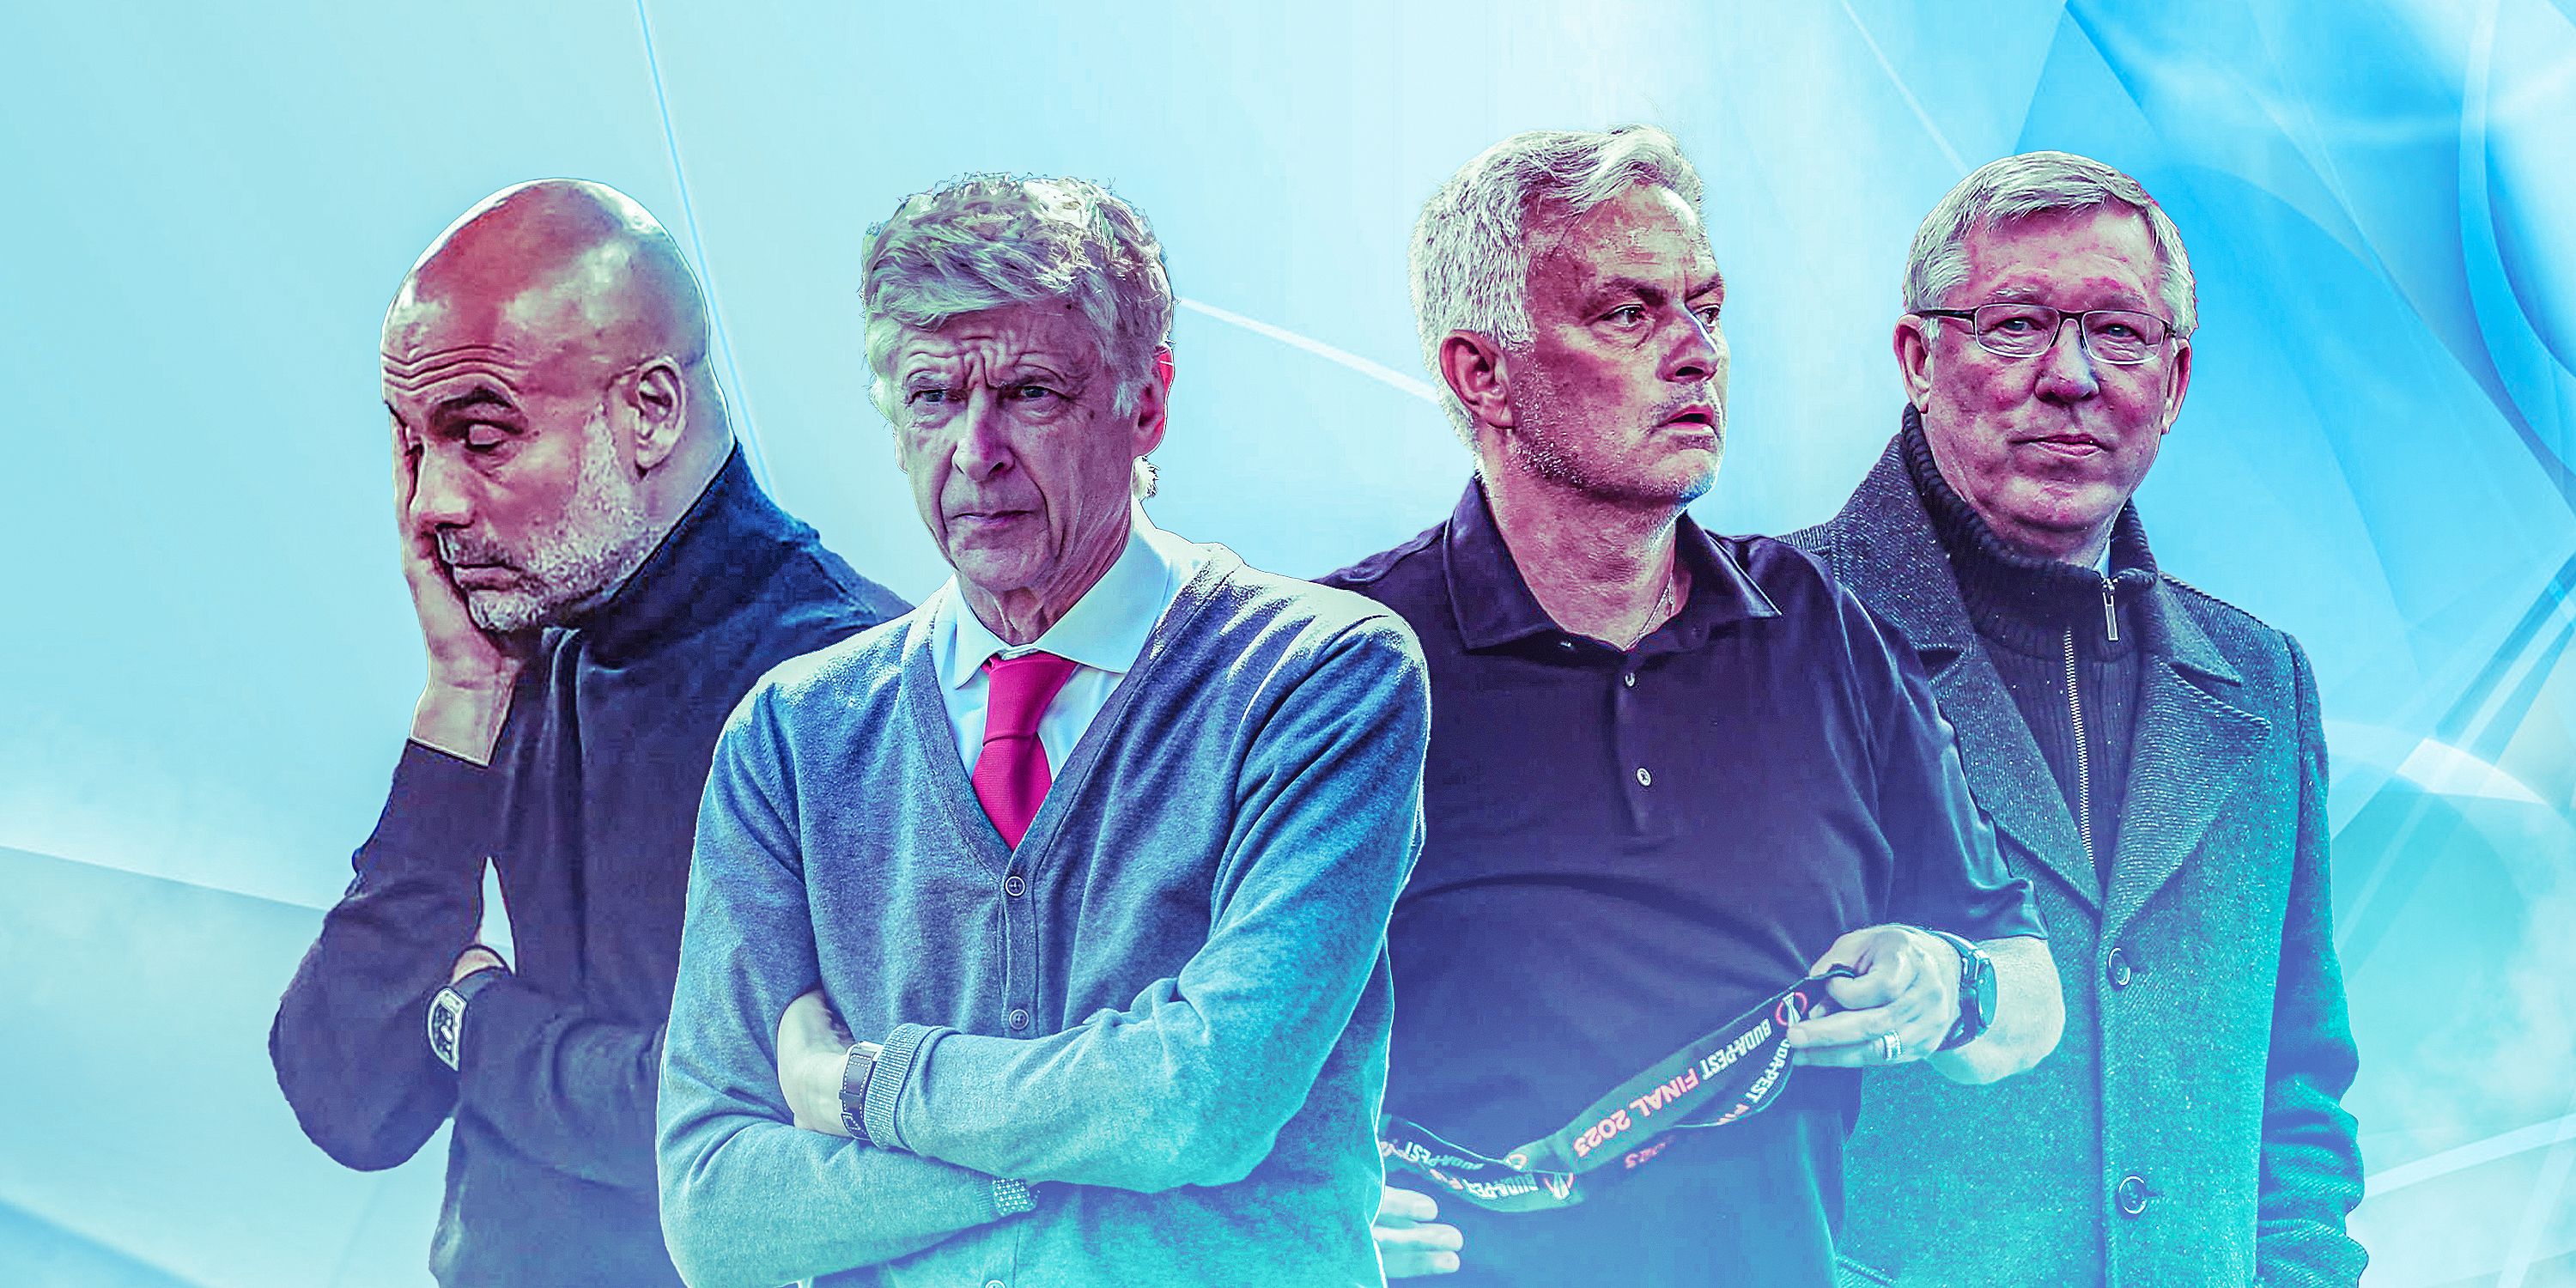 Guardiola, Wenger, Mourinho and Sir Alex Ferguson have been rivals over the years